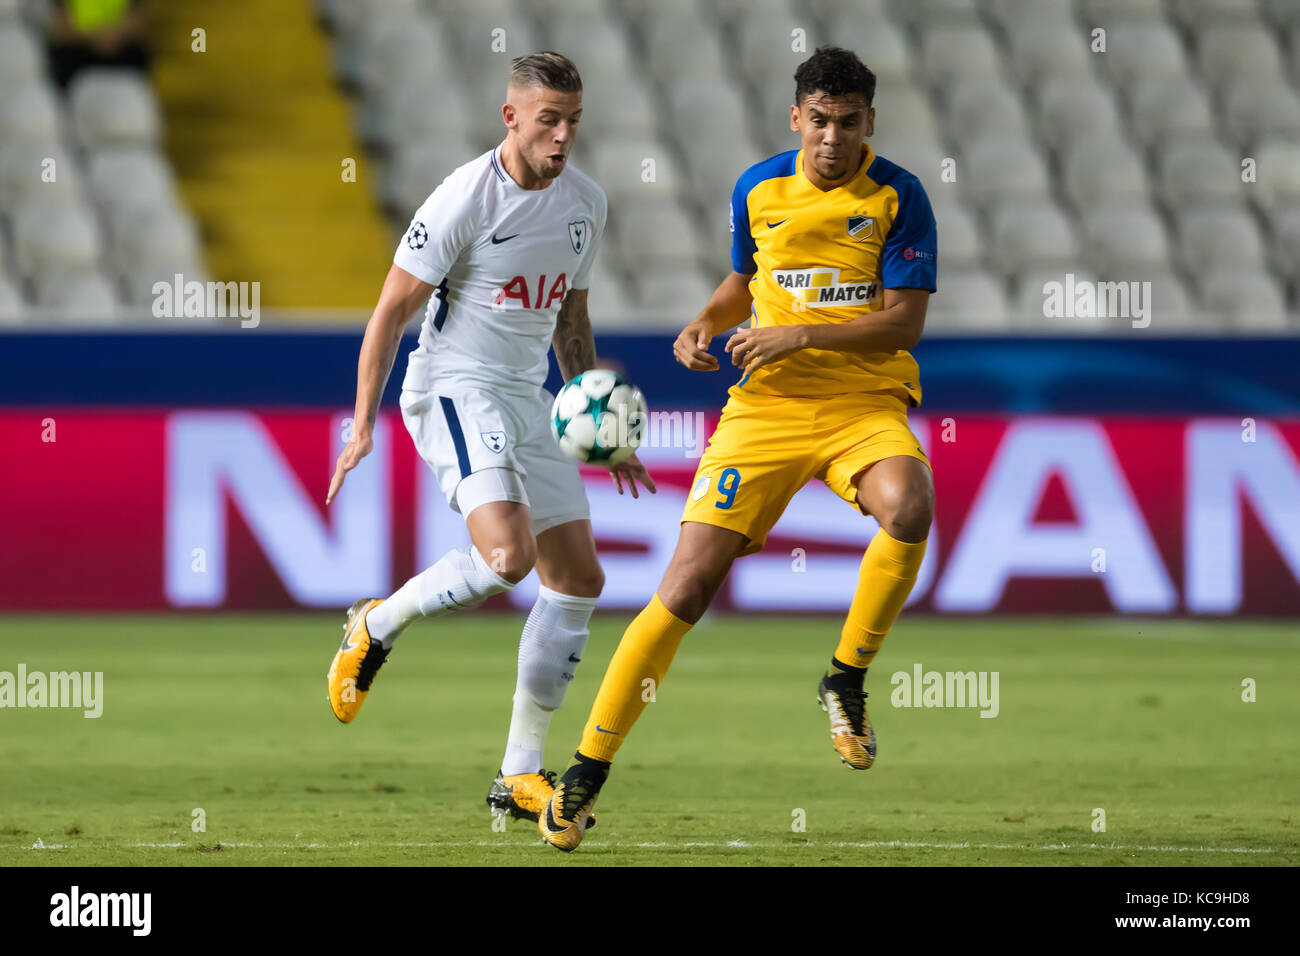 Nicosia, Cyprus - Semptember 26, 2017: Player of Tottenham Toby Alderweireld  in action during the UEFA Champions League game between APOEL VS Tottenh Stock Photo